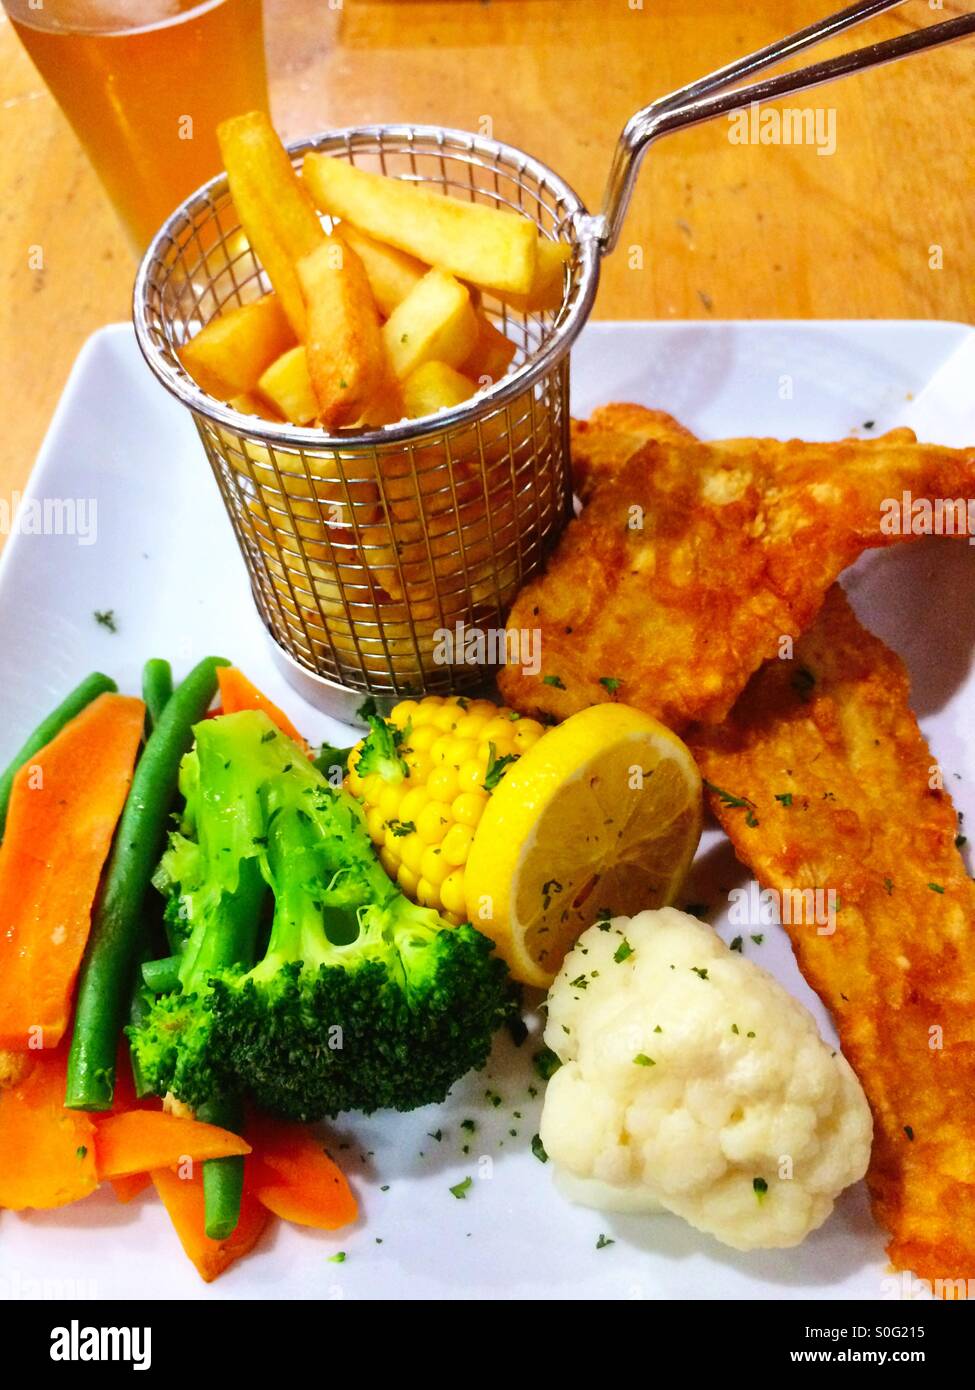 Typical Australian pub meal of fish and chips, vegetables and glass of beer Stock Photo